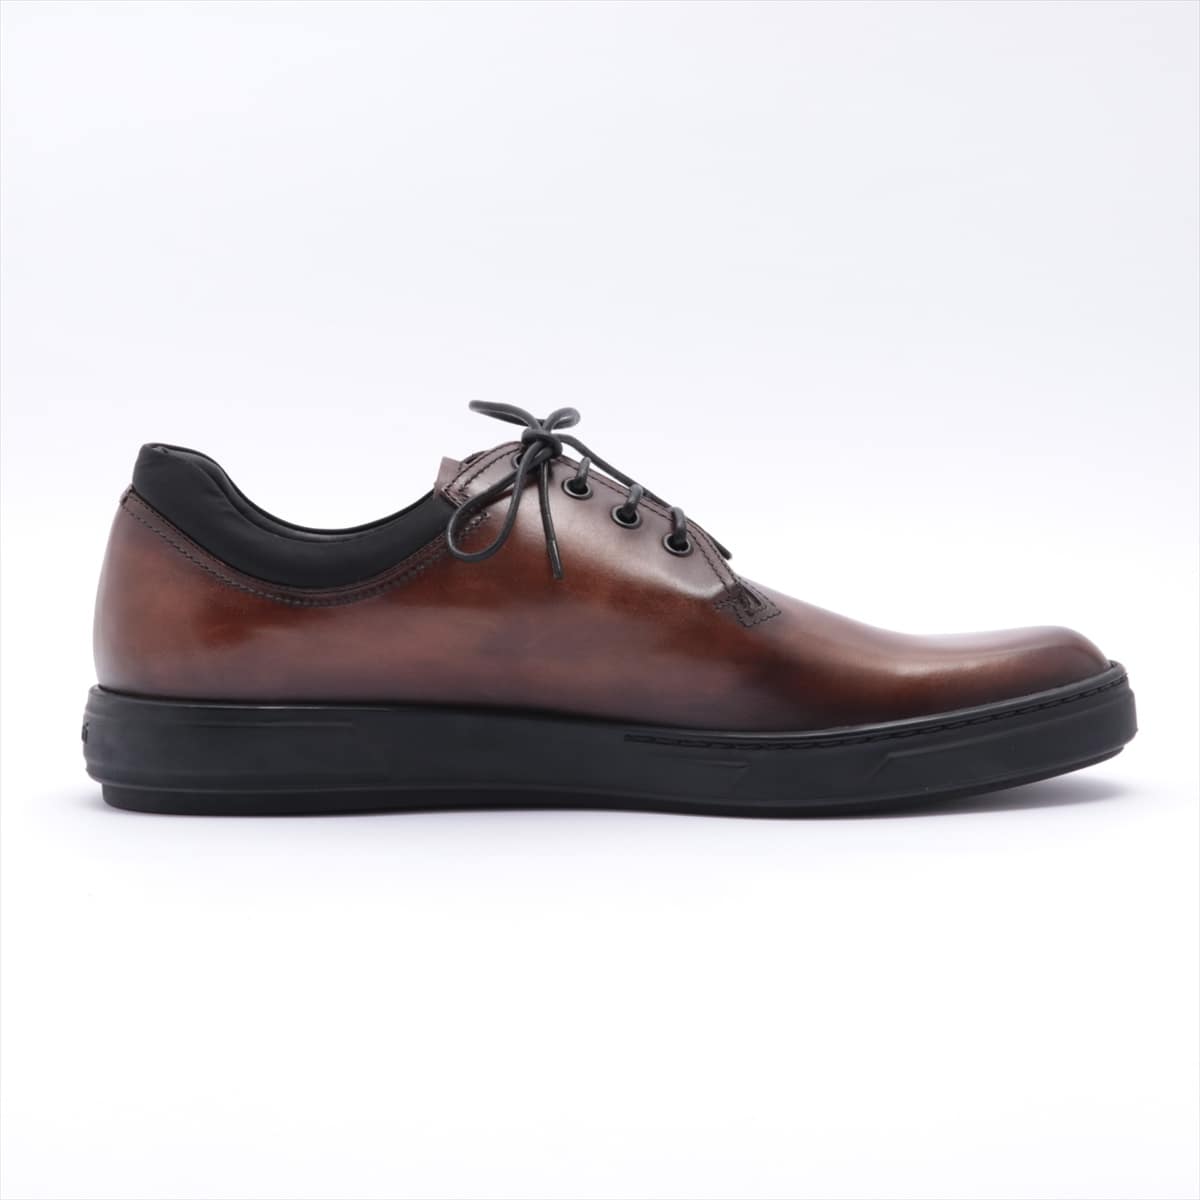 Berluti Leather Leather shoes 9 Men's Brown 4557